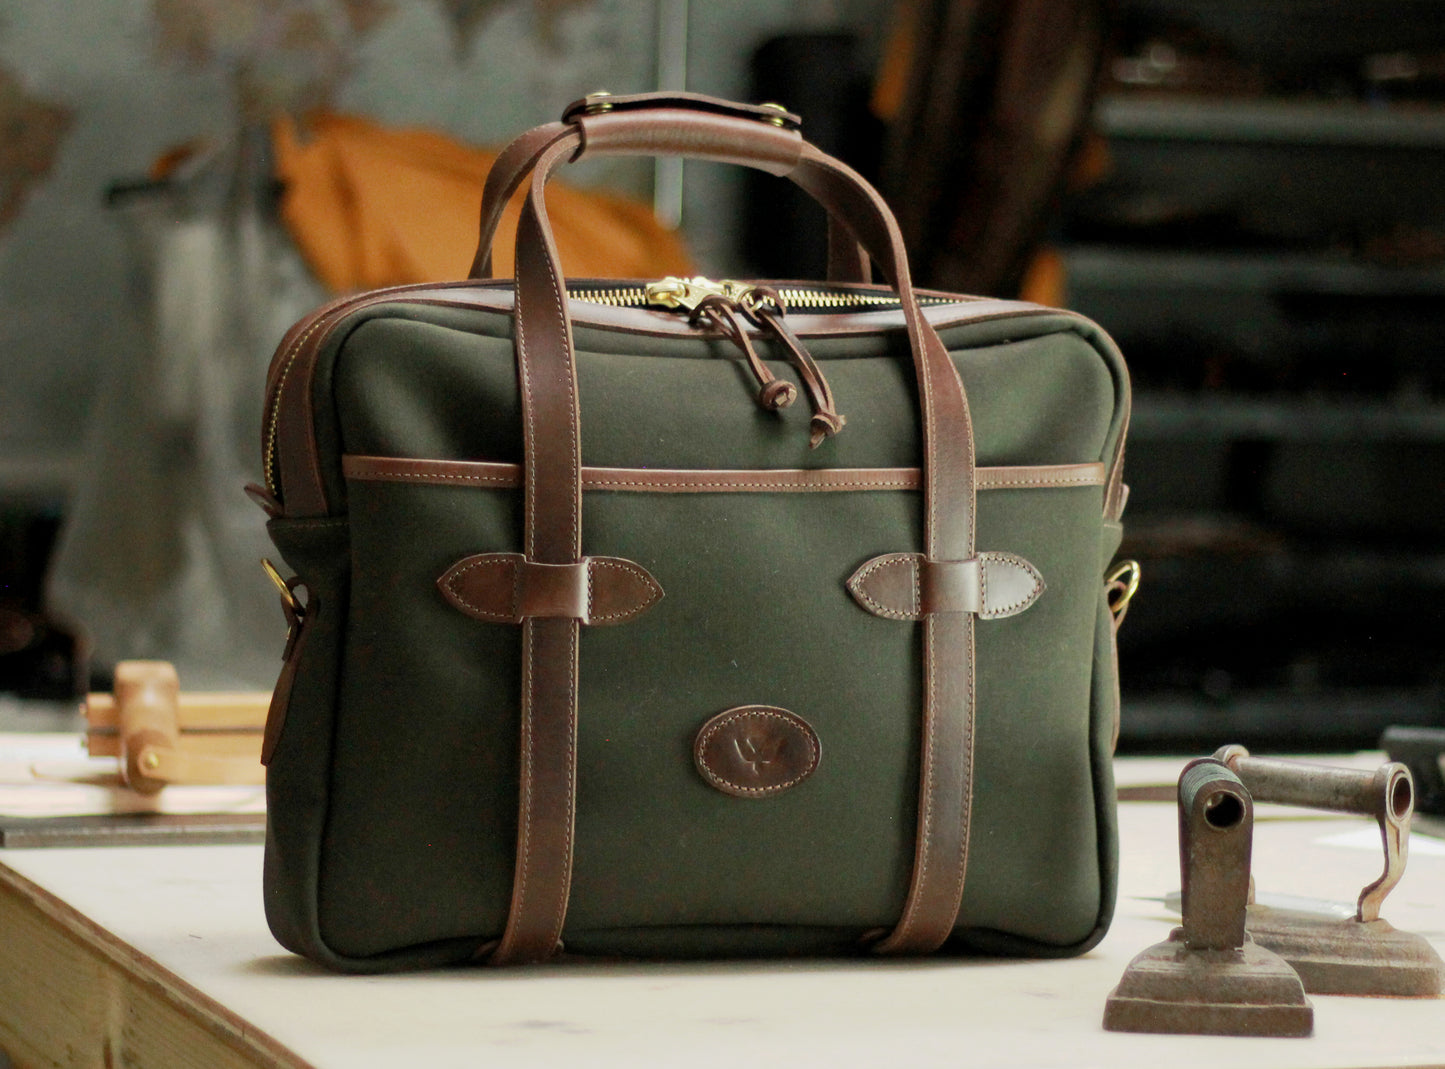 Heritage Briefcase: Waxed Canvas & Italian Leather Edition